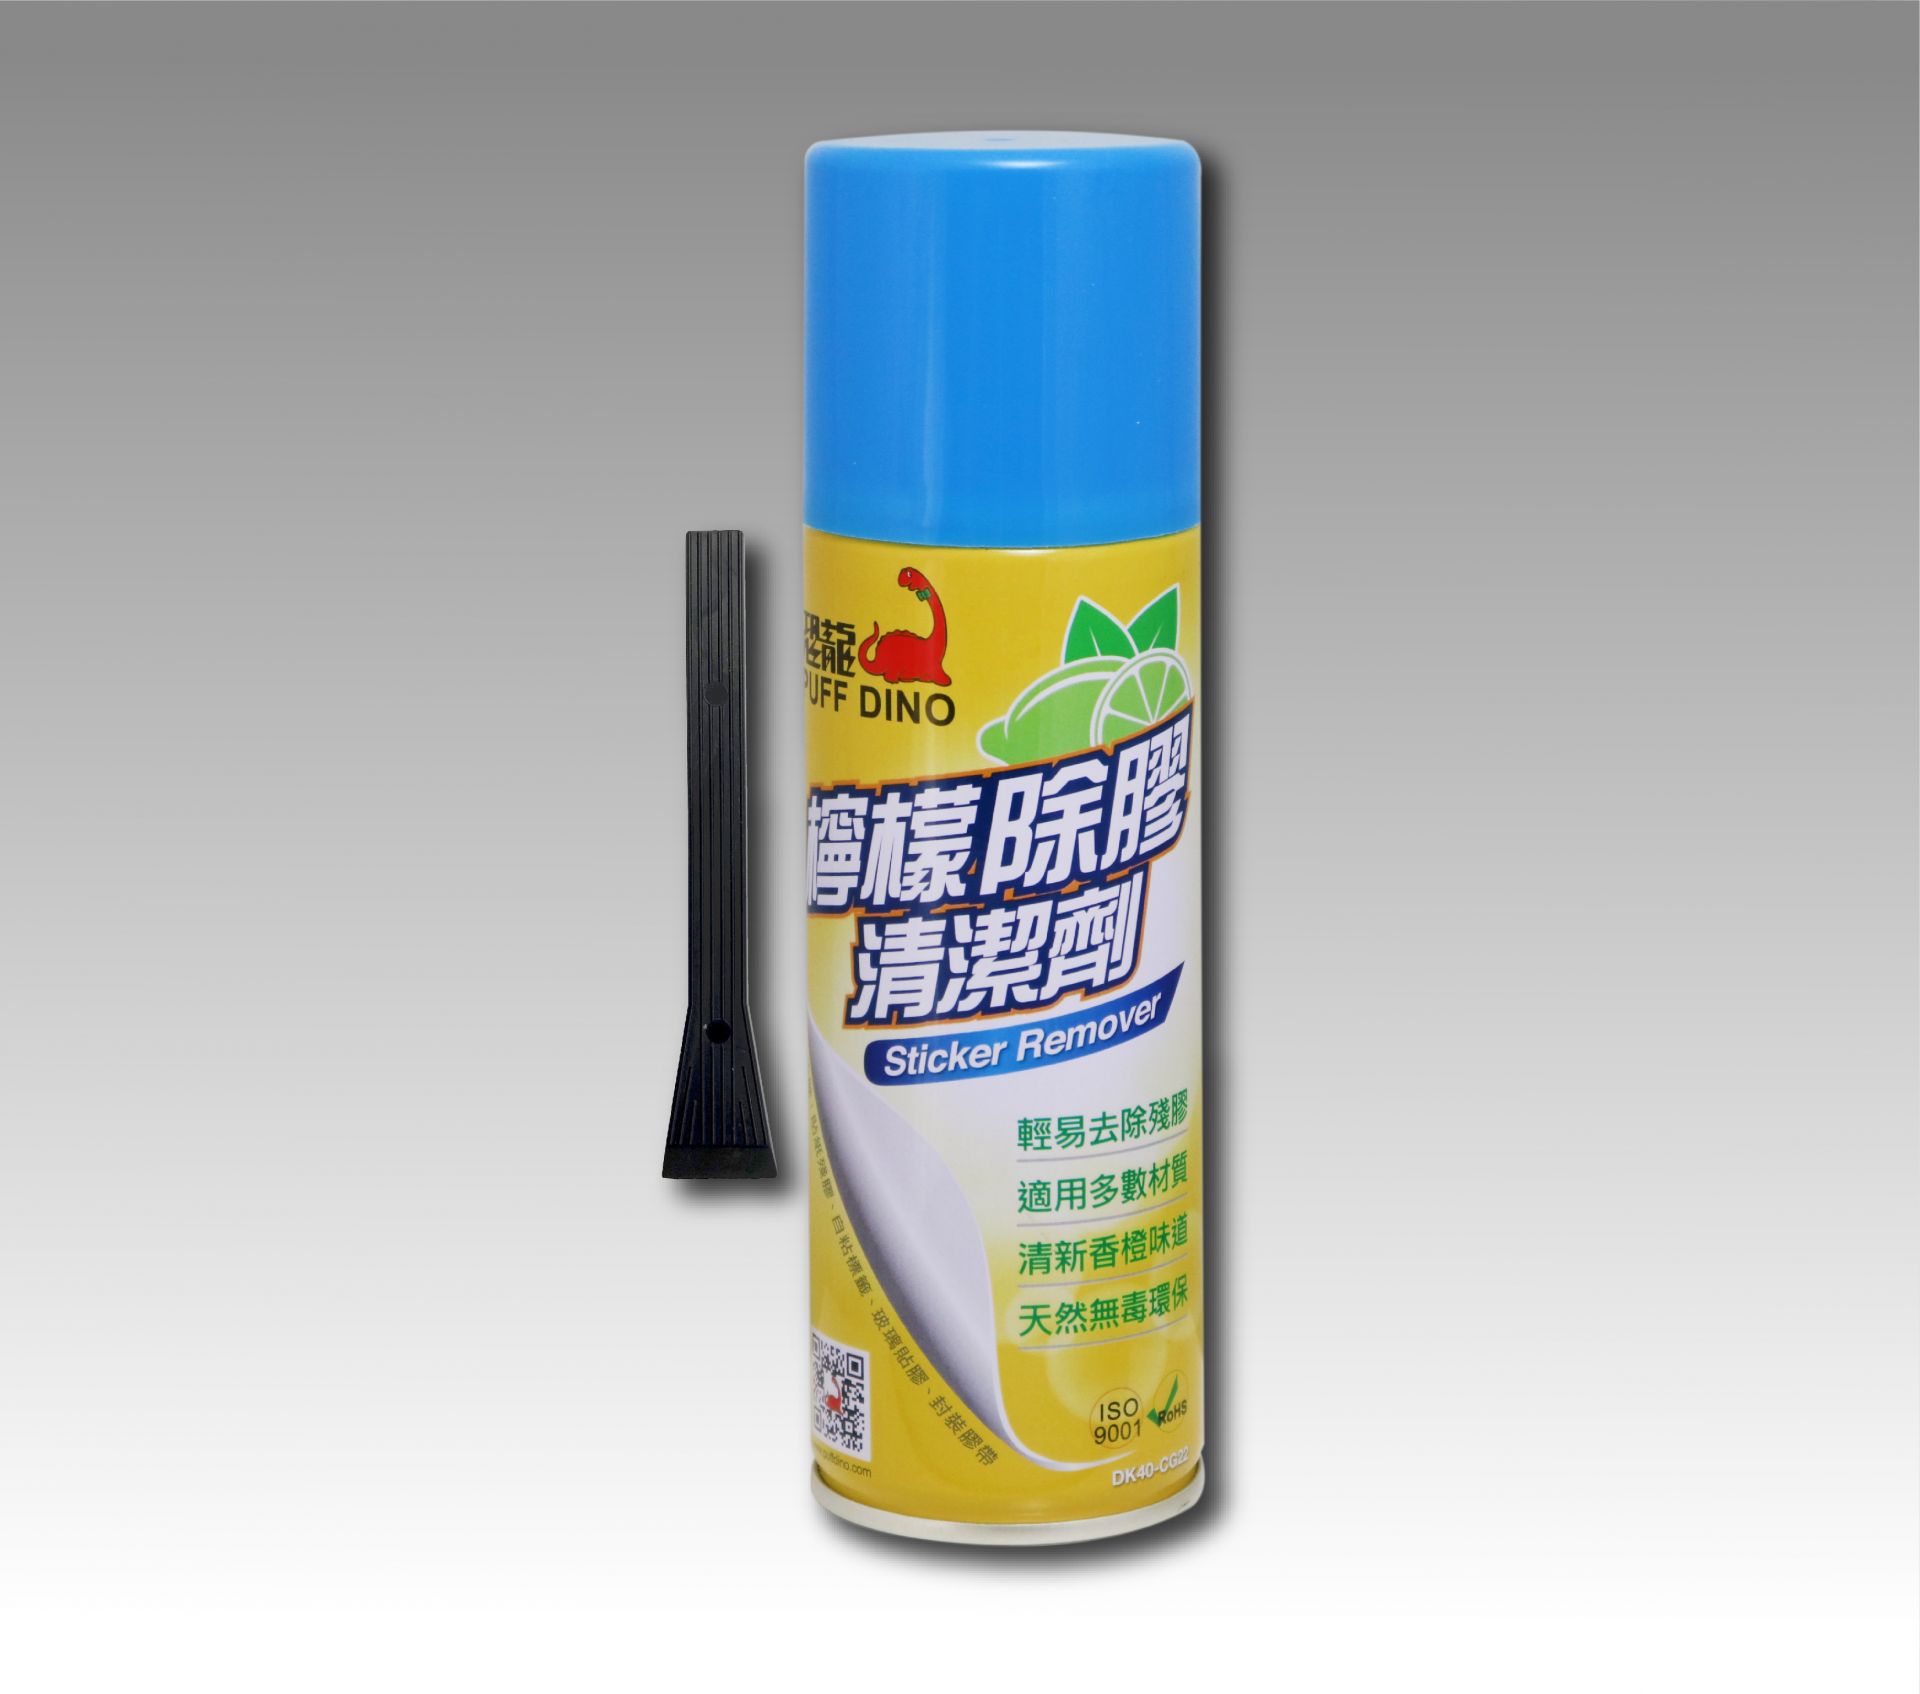 Effective sticker remover spray At Low Prices 